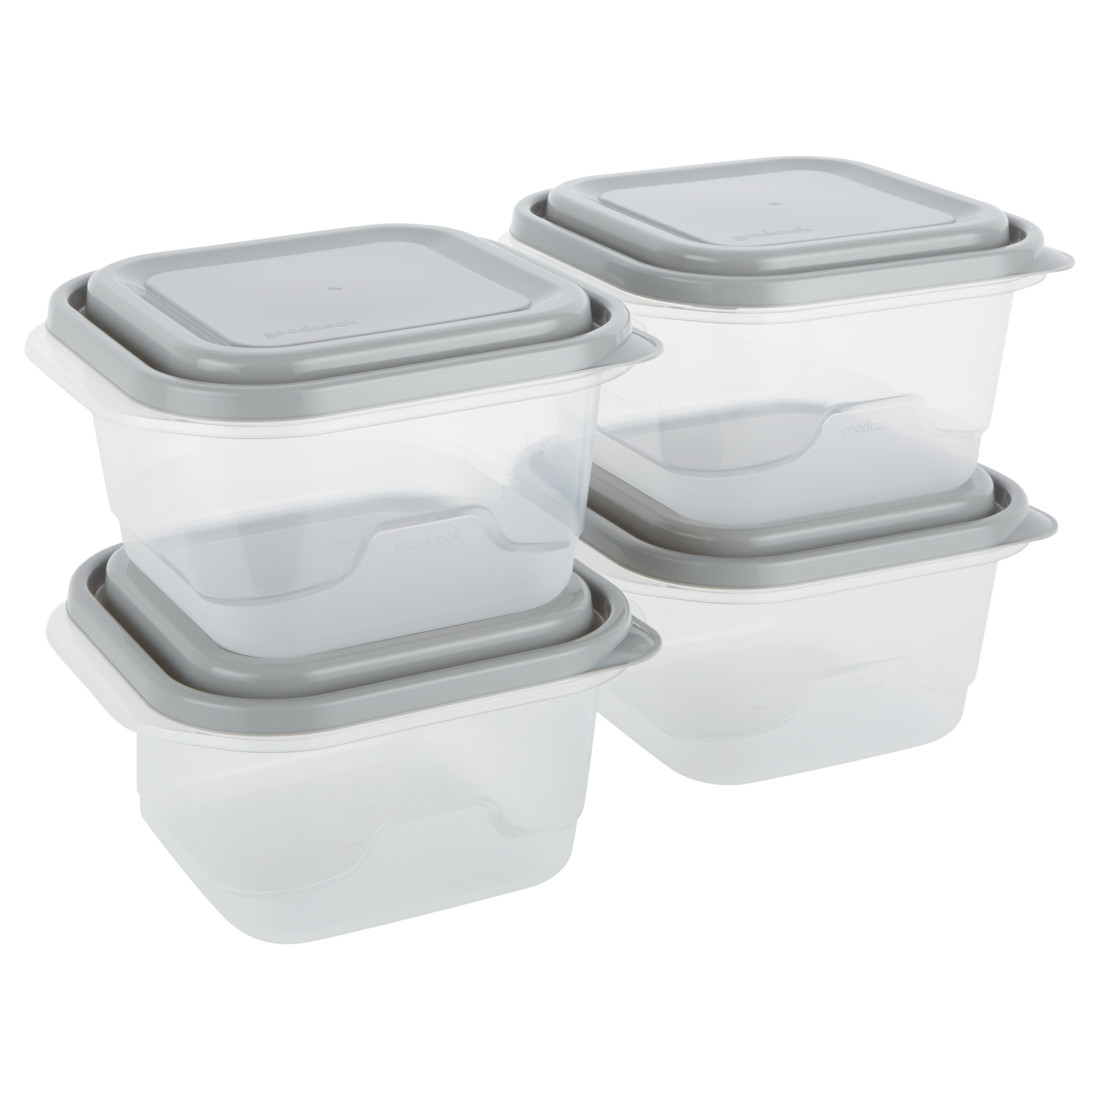 LARGE SET 28 pc Airtight Food Storage Containers w/ Lids - Retails